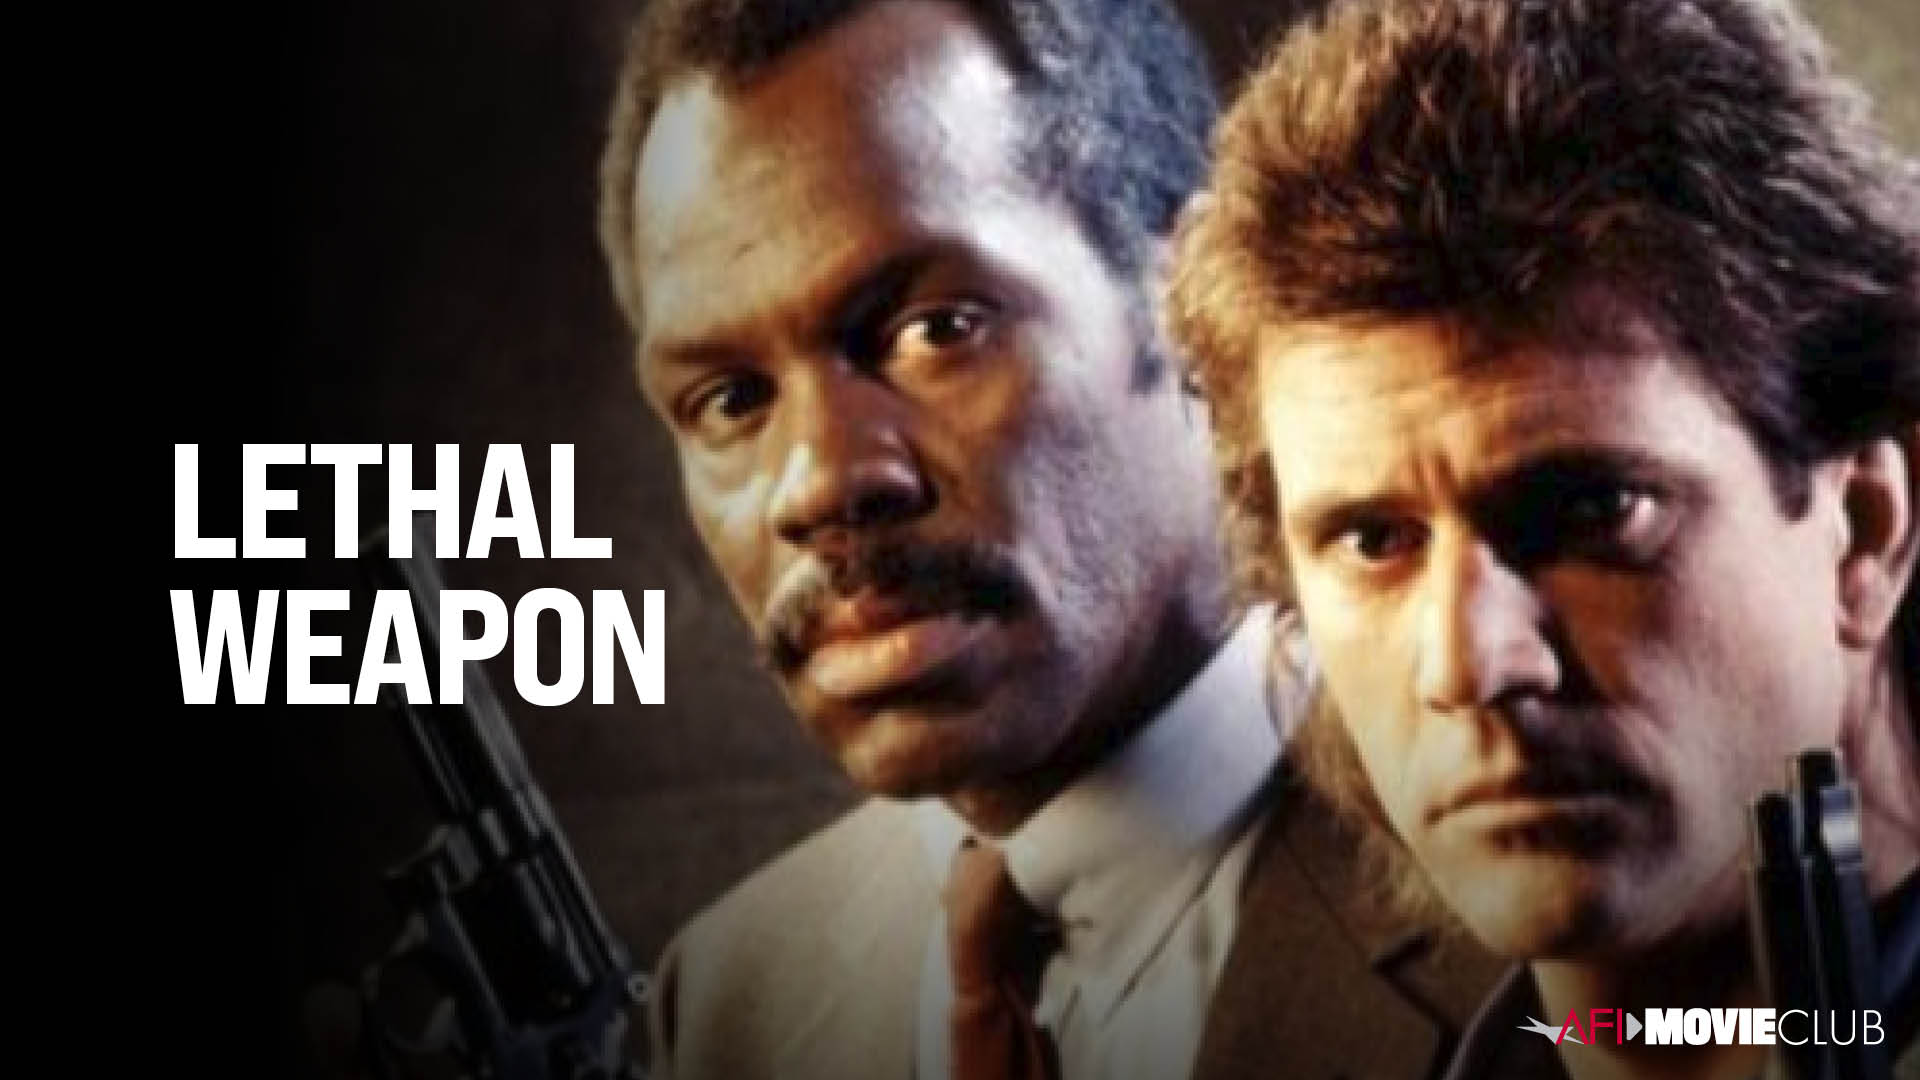 Lethal Weapon Film Still - Mel Gibson and Danny Glover